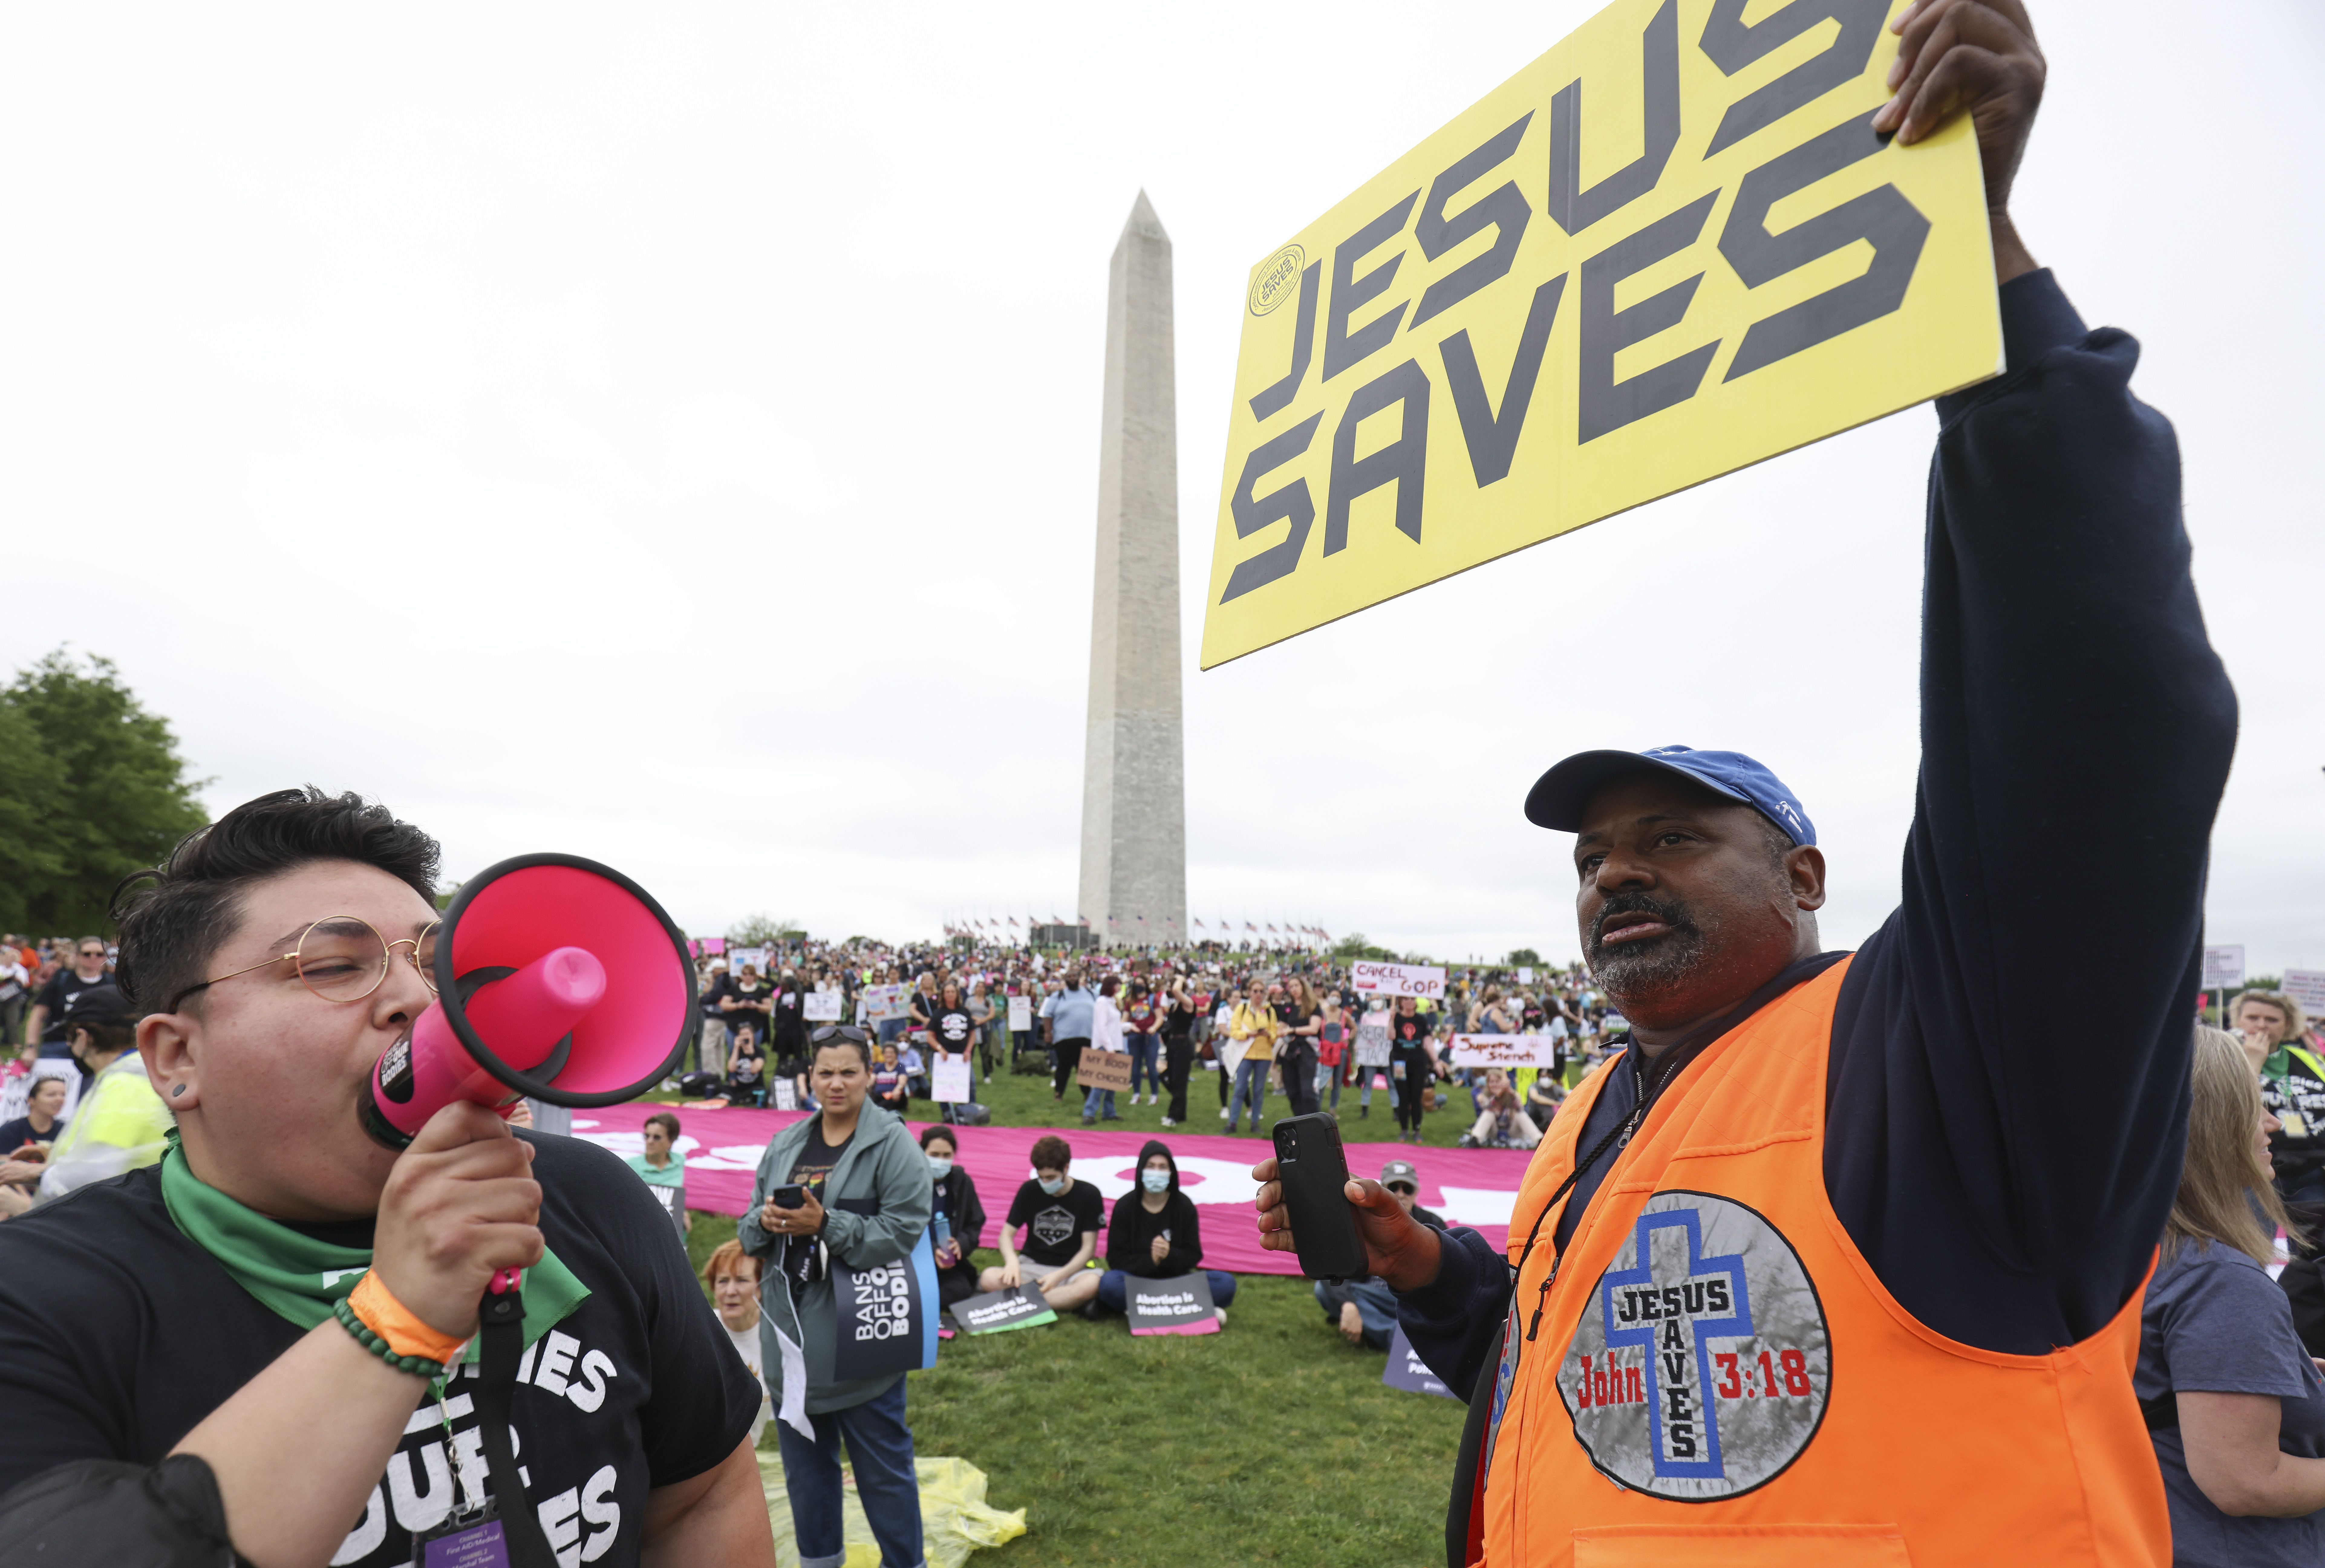 An abortion rights activist and a counter demonstrator at the Washington Monument on May 14.